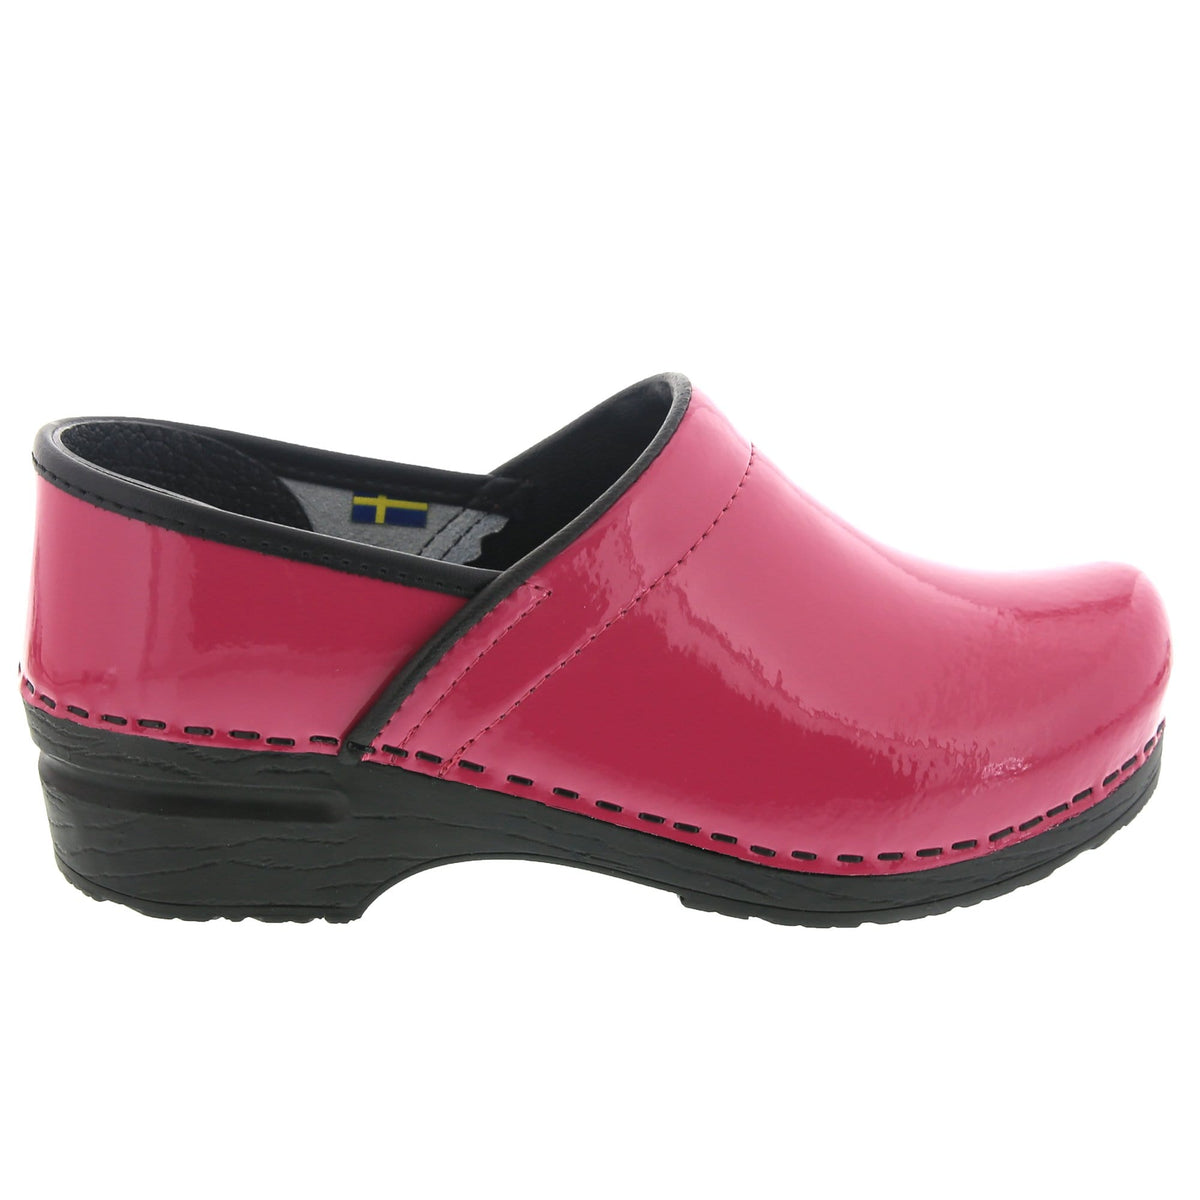 pink patent leather clogs